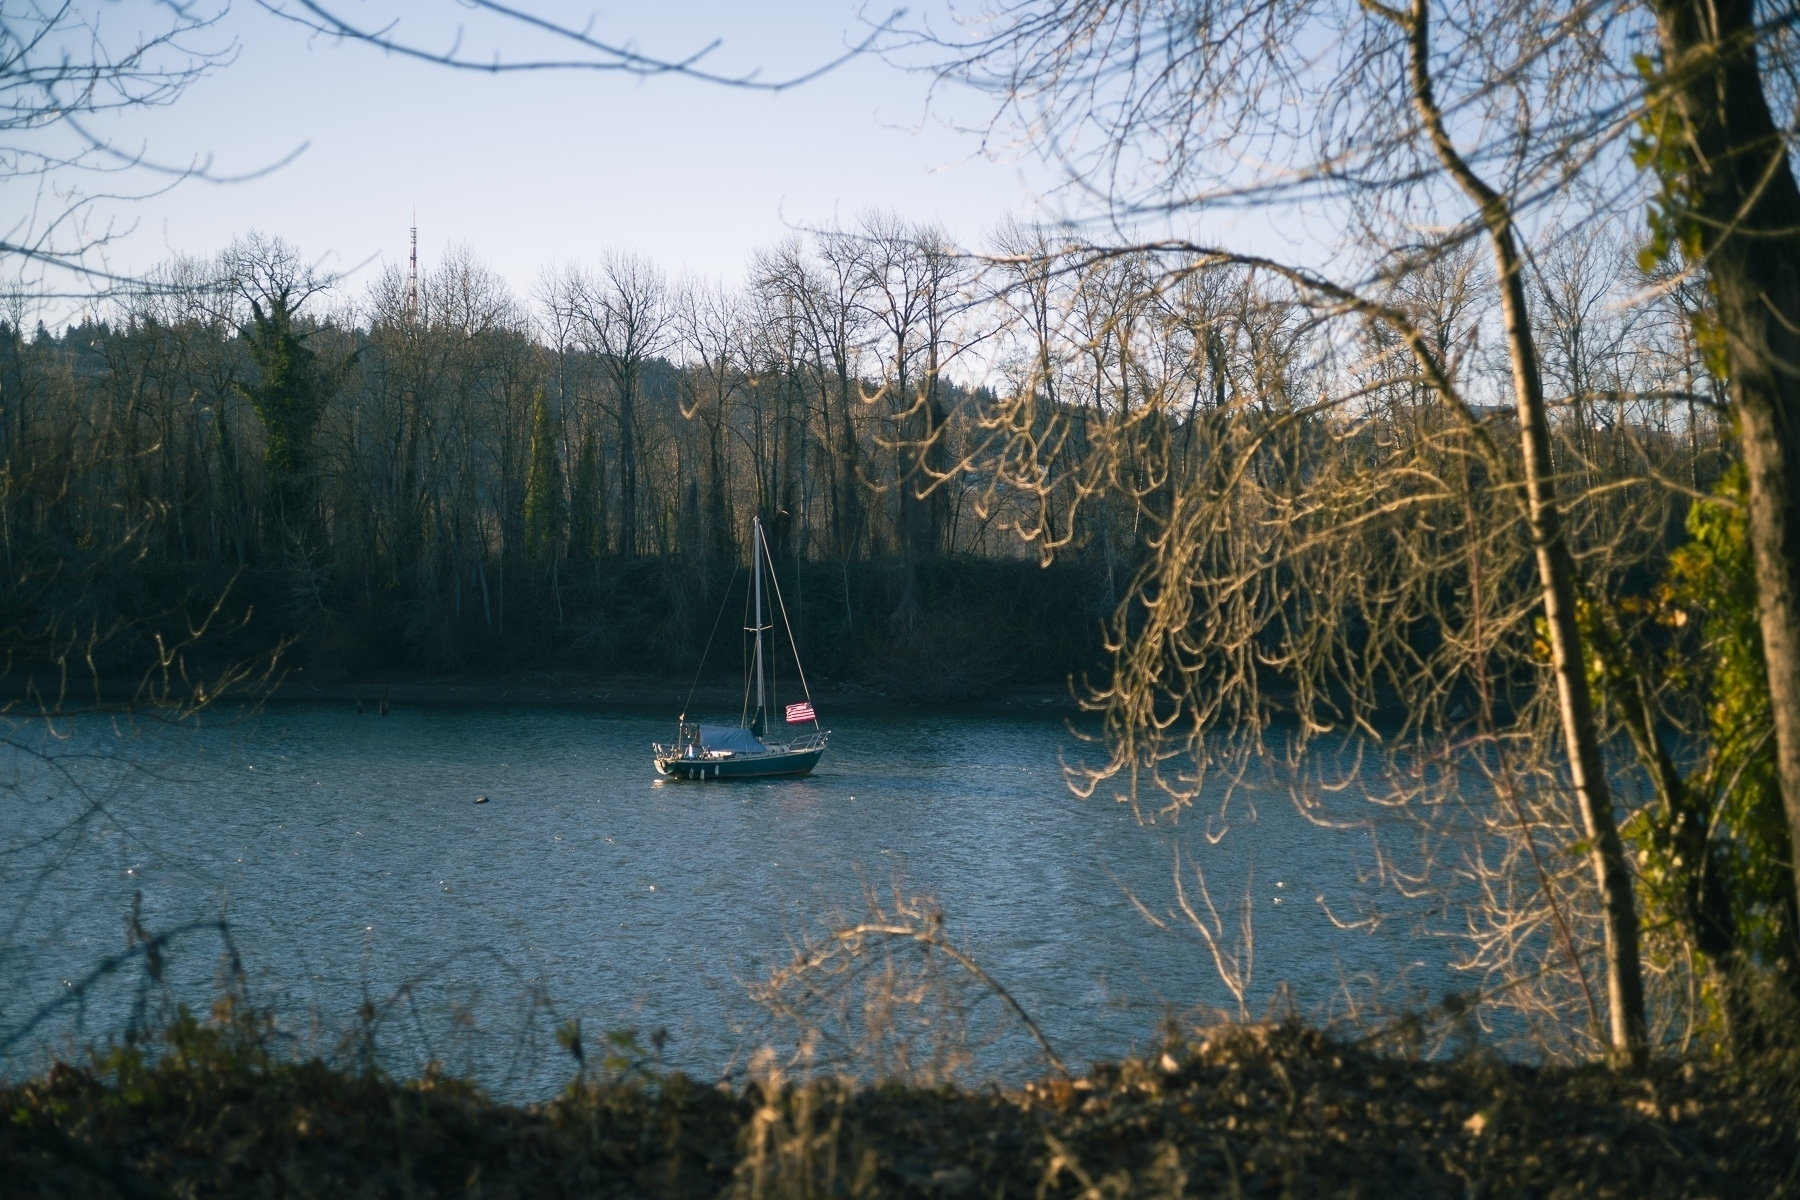 A sailboat in the middle of a river lit by the warm glow of winter sunlight. There’s a US flag on the boat. Fore ground and background river banks have trees without leaves.